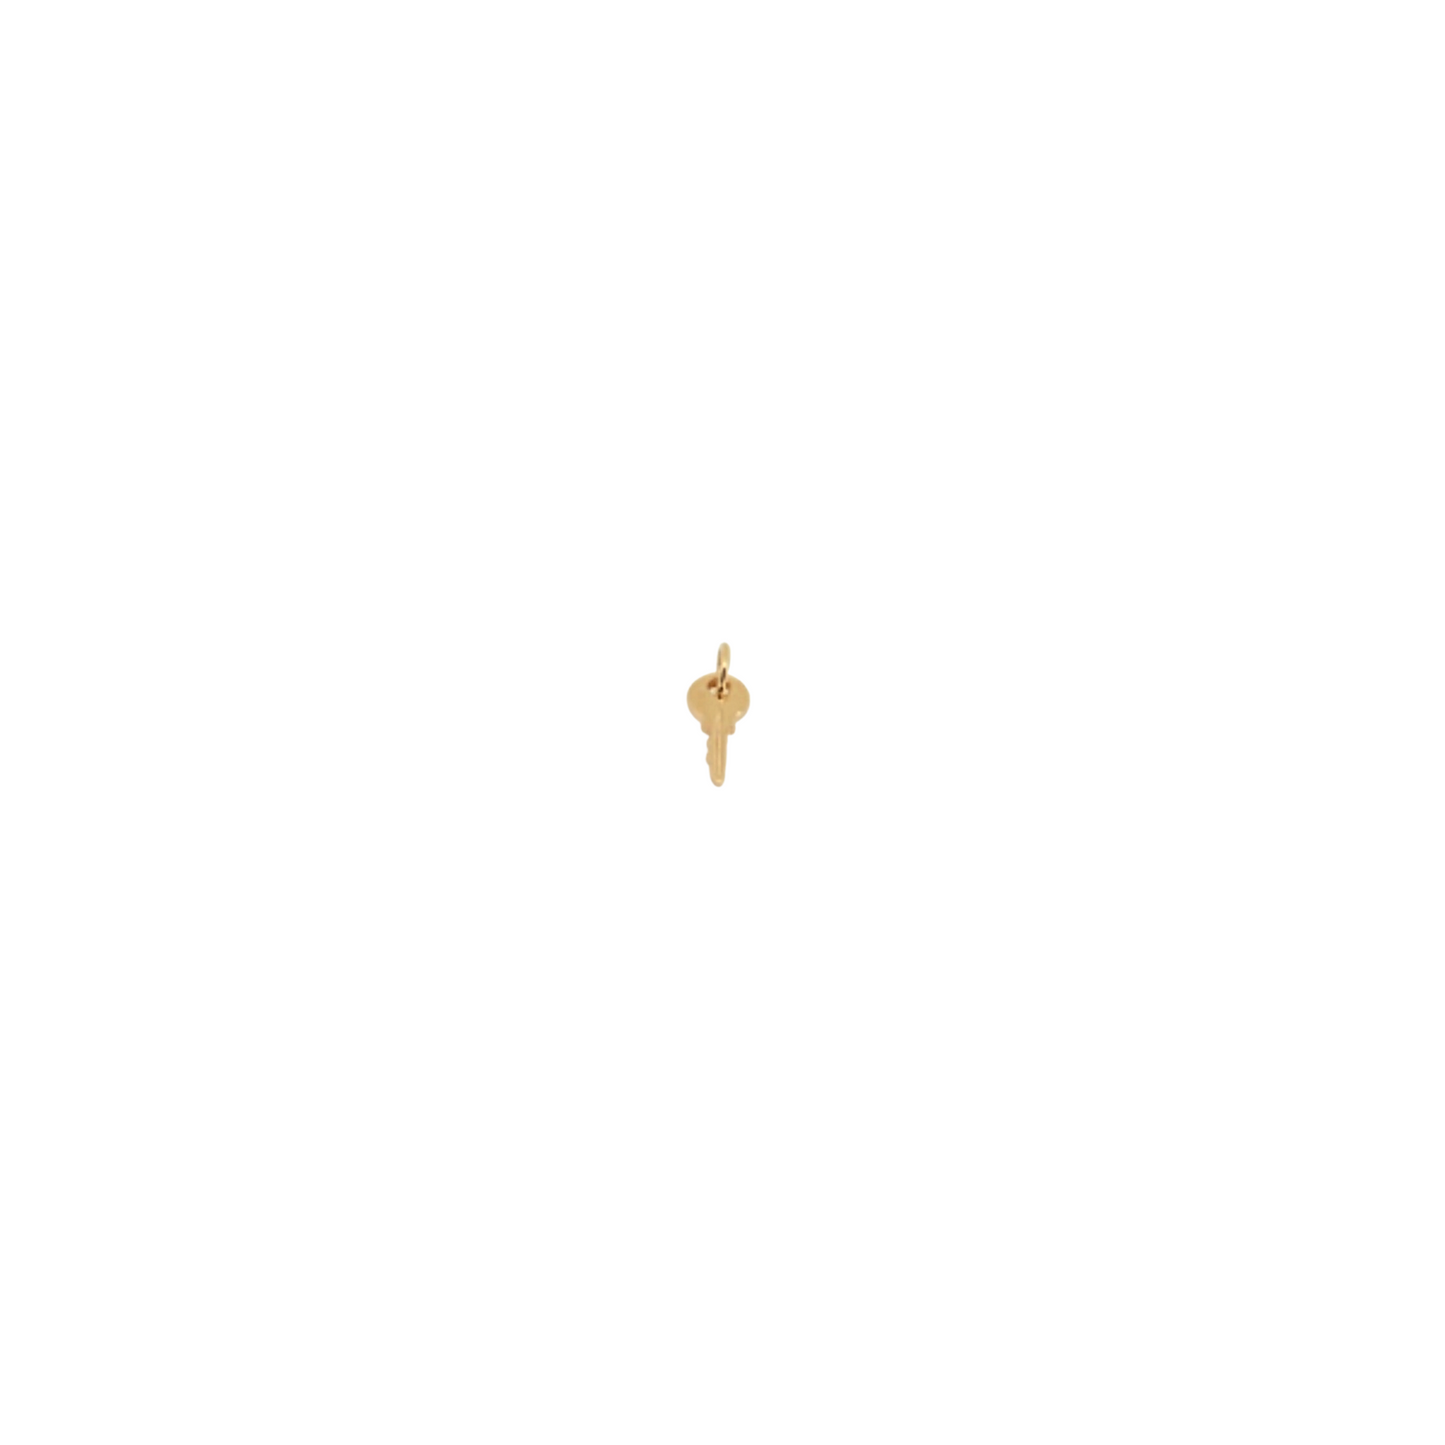 Key Charm in Solid 9k Yellow Gold